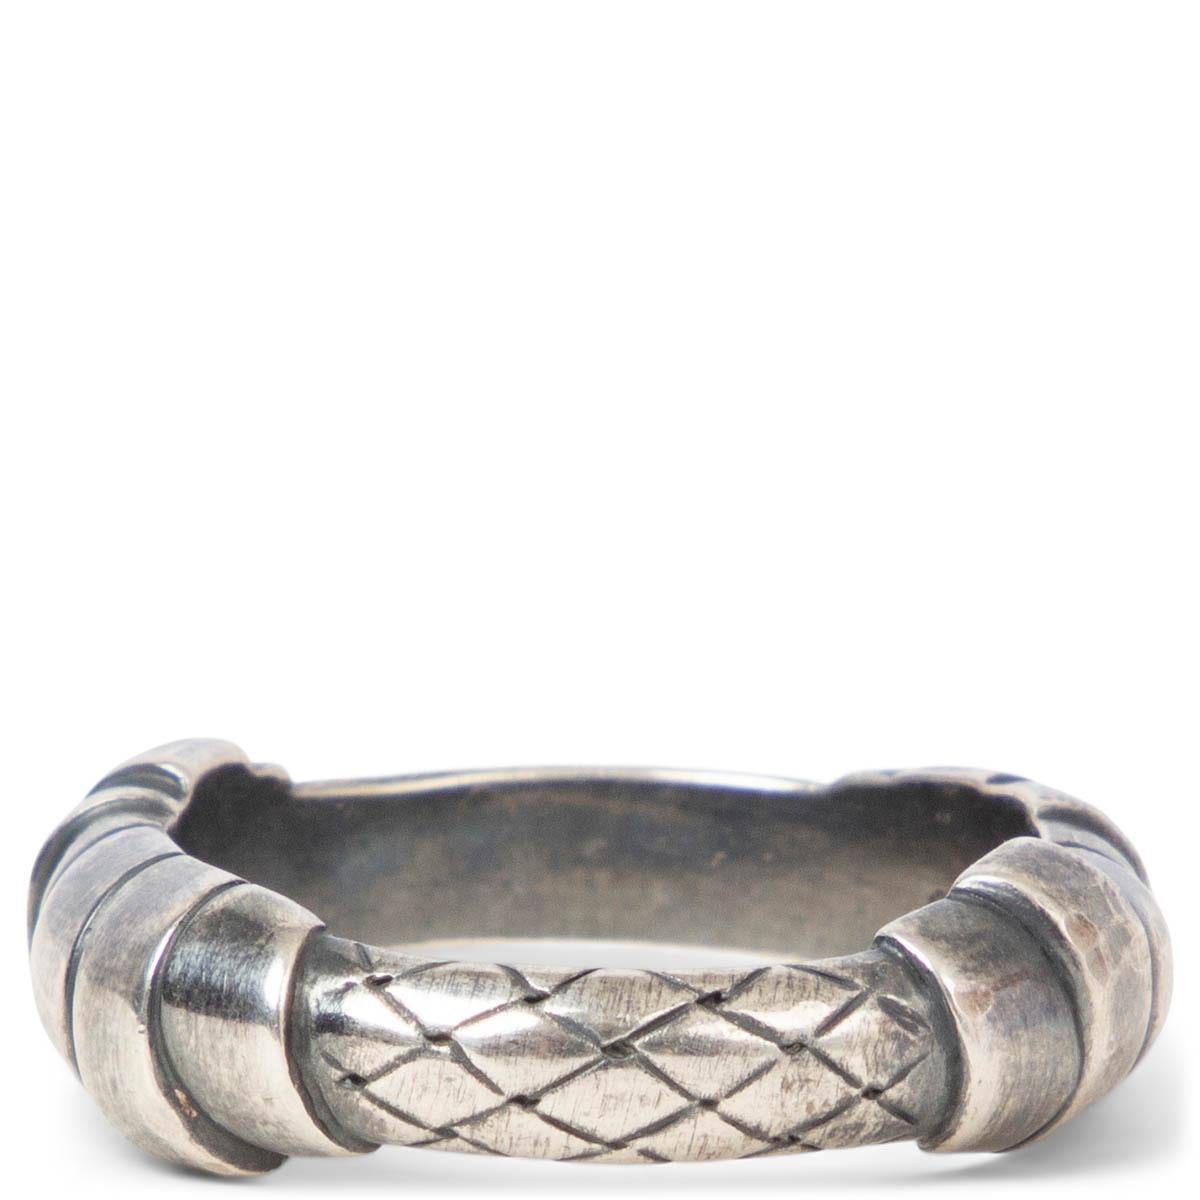 100% authentic Bottega Veneta braided engraved band ring in oxidised sterling silver with wrapped details. Has been worn and is in excellent condition.

Measurements
Size	8.5
Width	0.5cm (0.2in)

All our listings include only the listed item unless